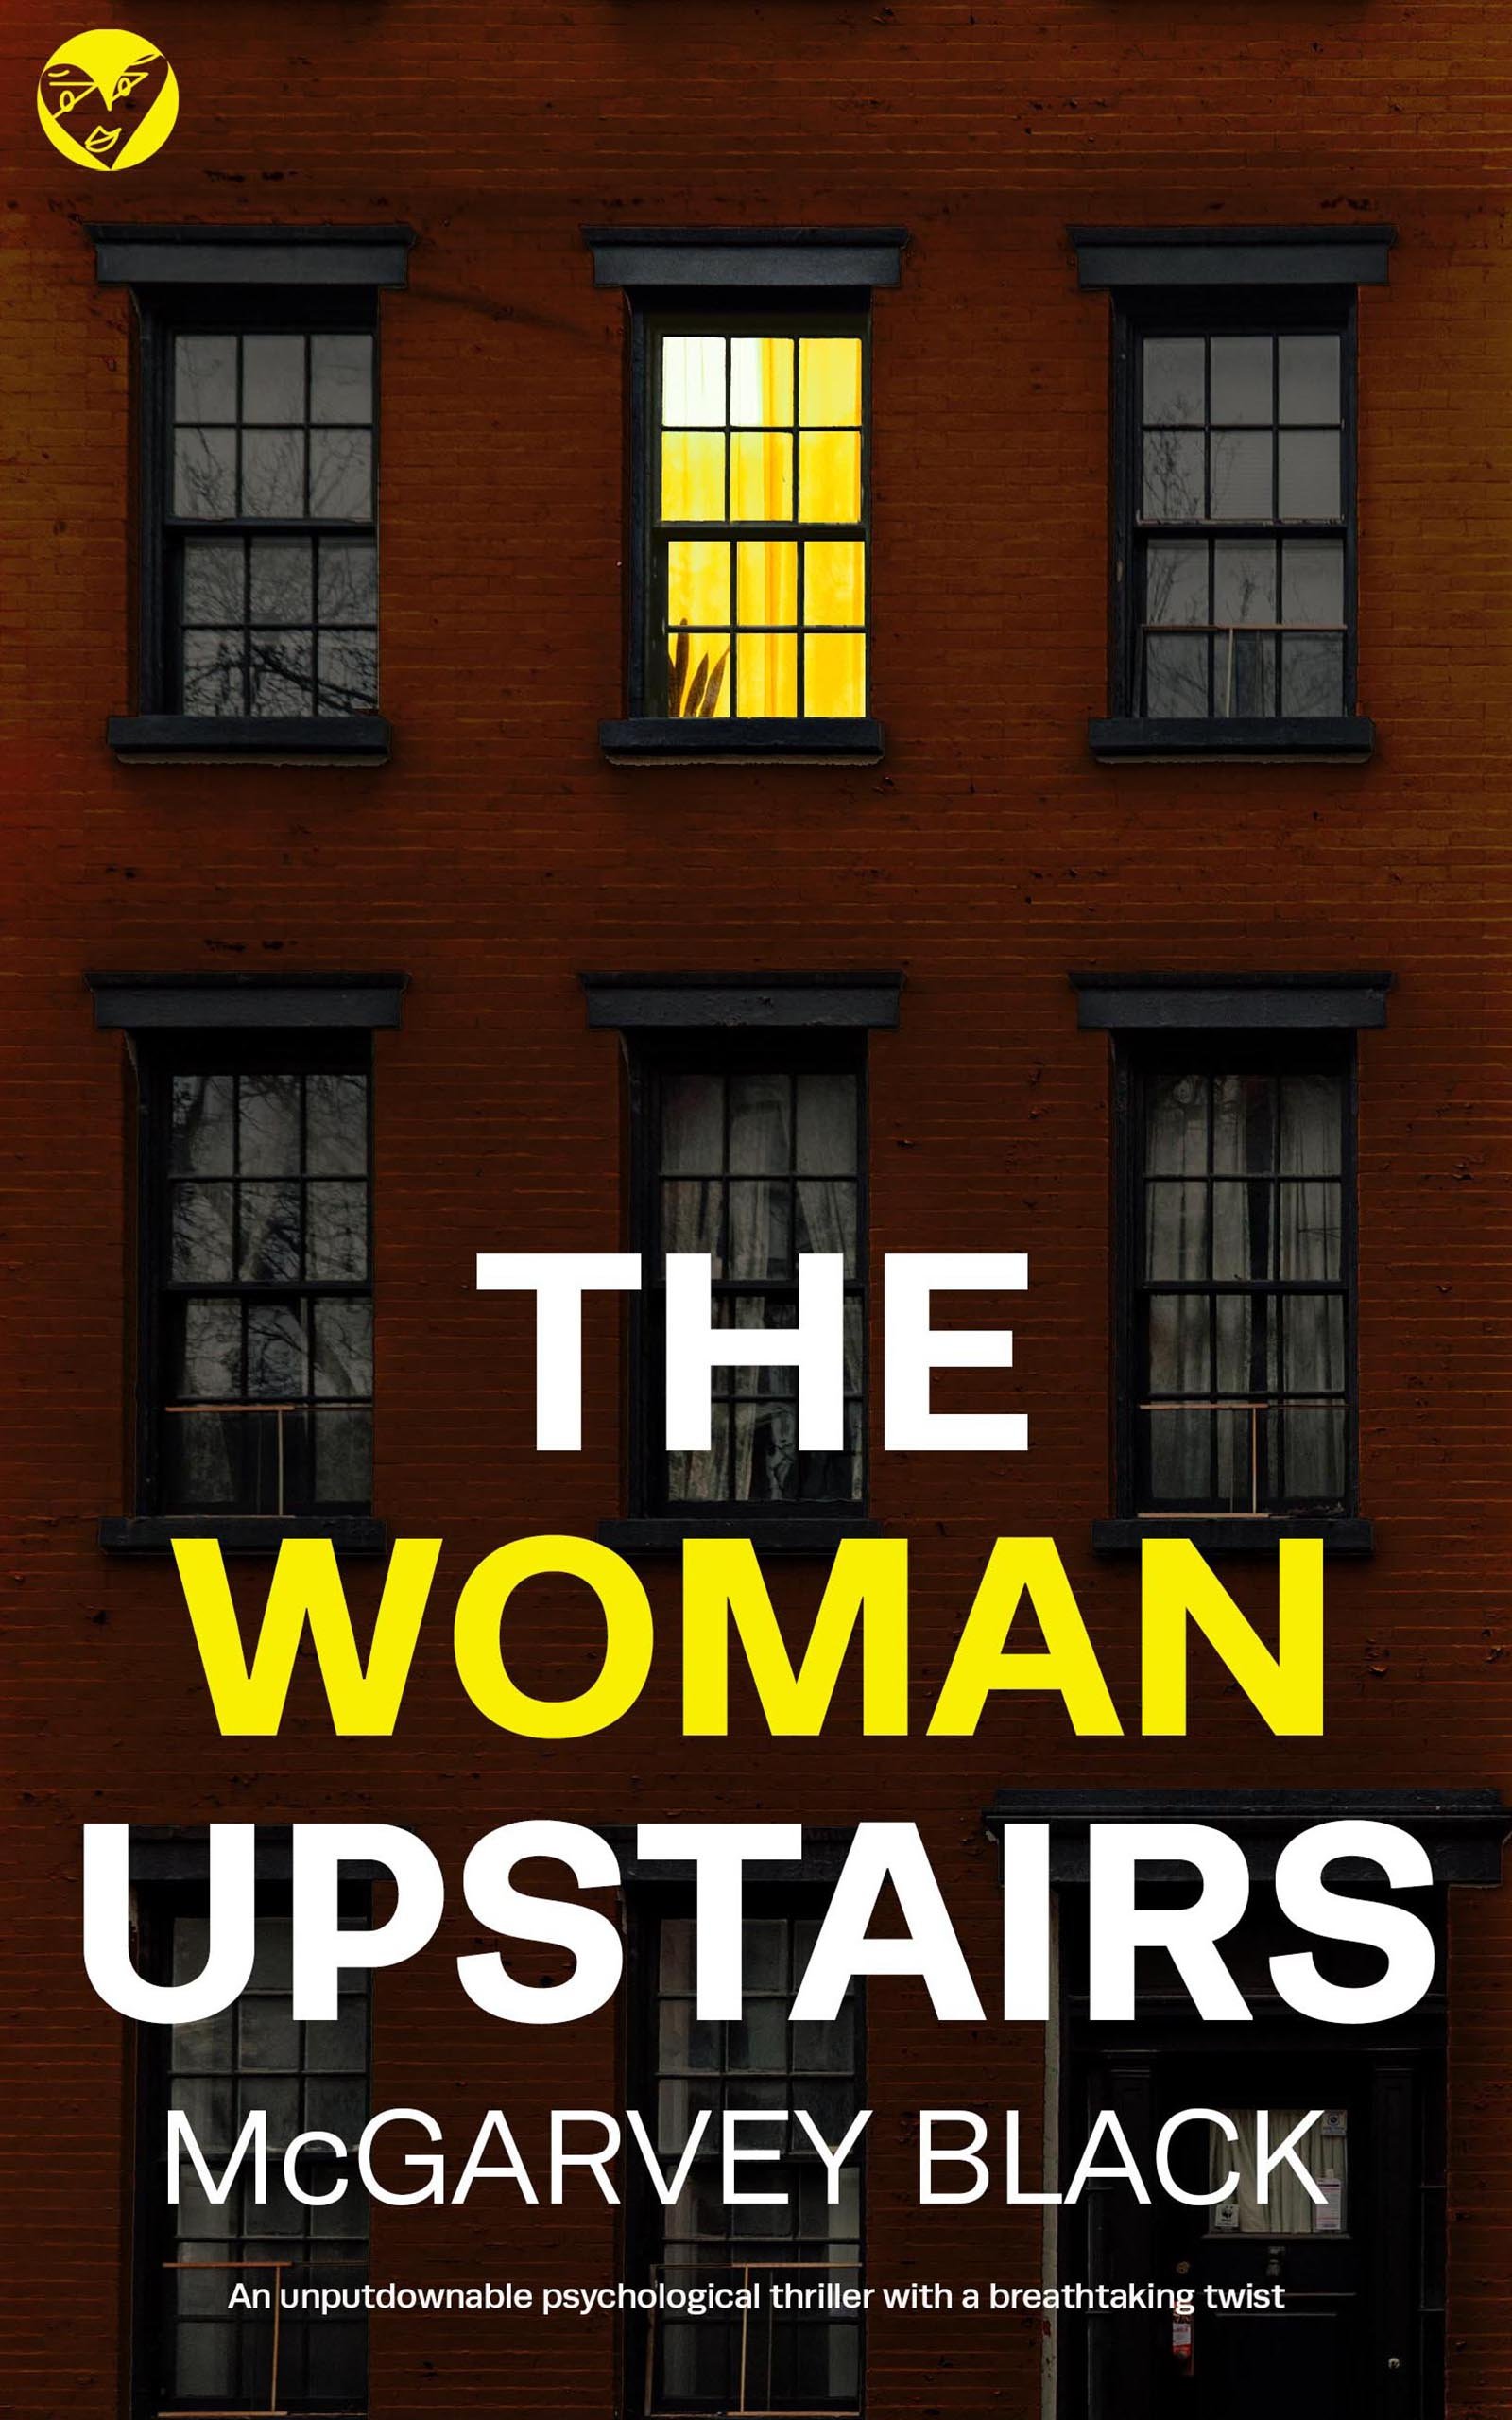 THE WOMAN UPSTAIRS cover publish.jpg